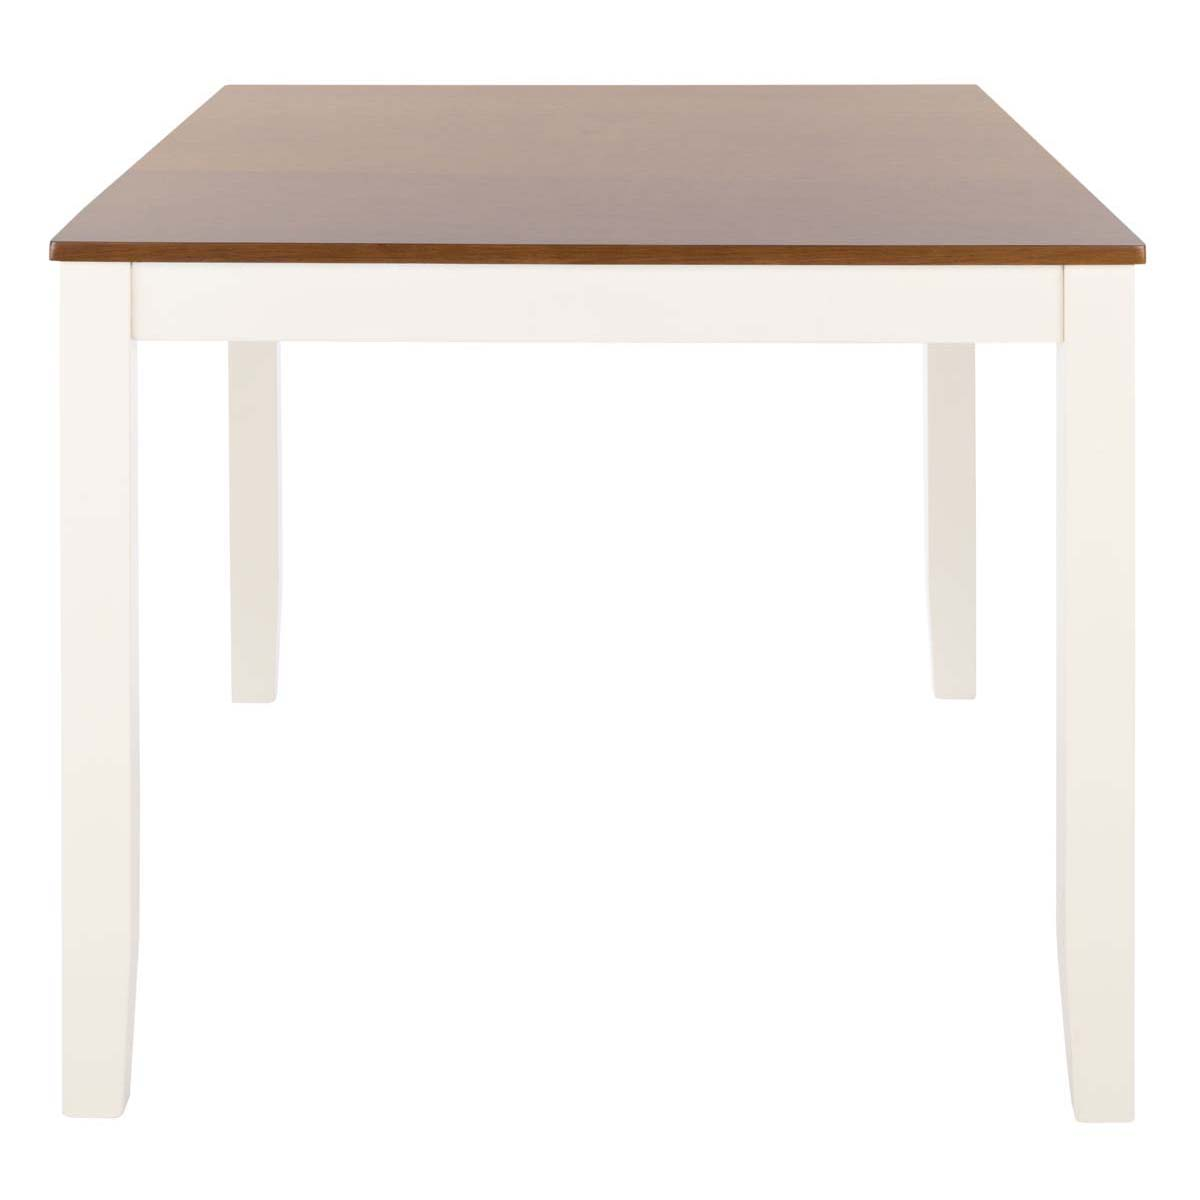 Safavieh Silio Rectangle Dining Table, DTB9213